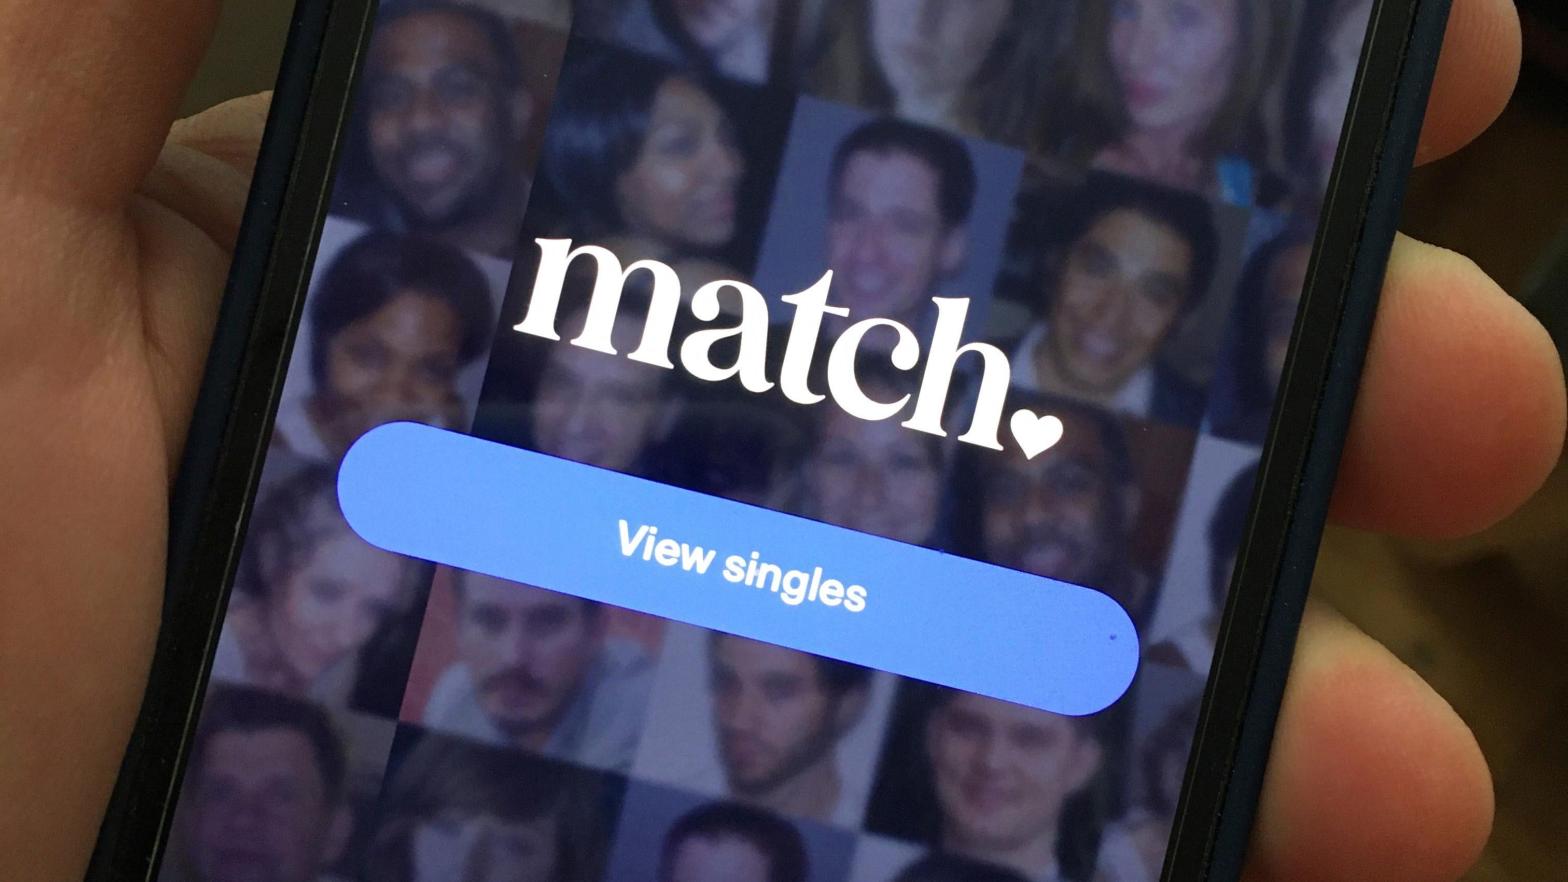 The UK's advertising regulator determined the Match.com TikTok was not a keeper. (Photo: STRF/STAR MAX/IPx, AP)